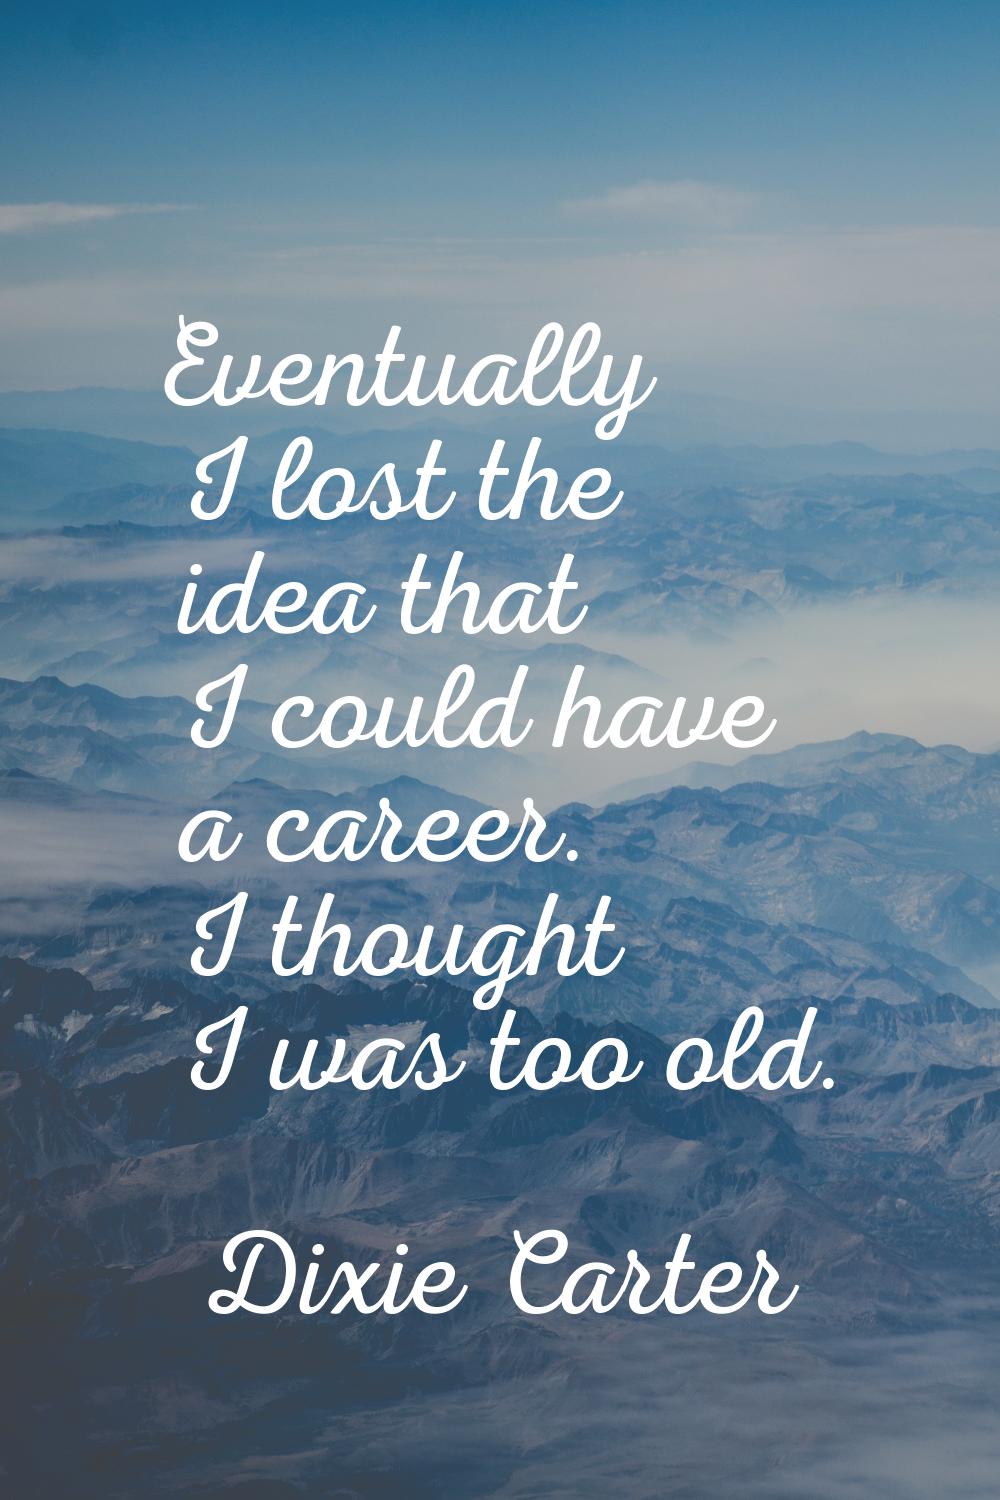 Eventually I lost the idea that I could have a career. I thought I was too old.